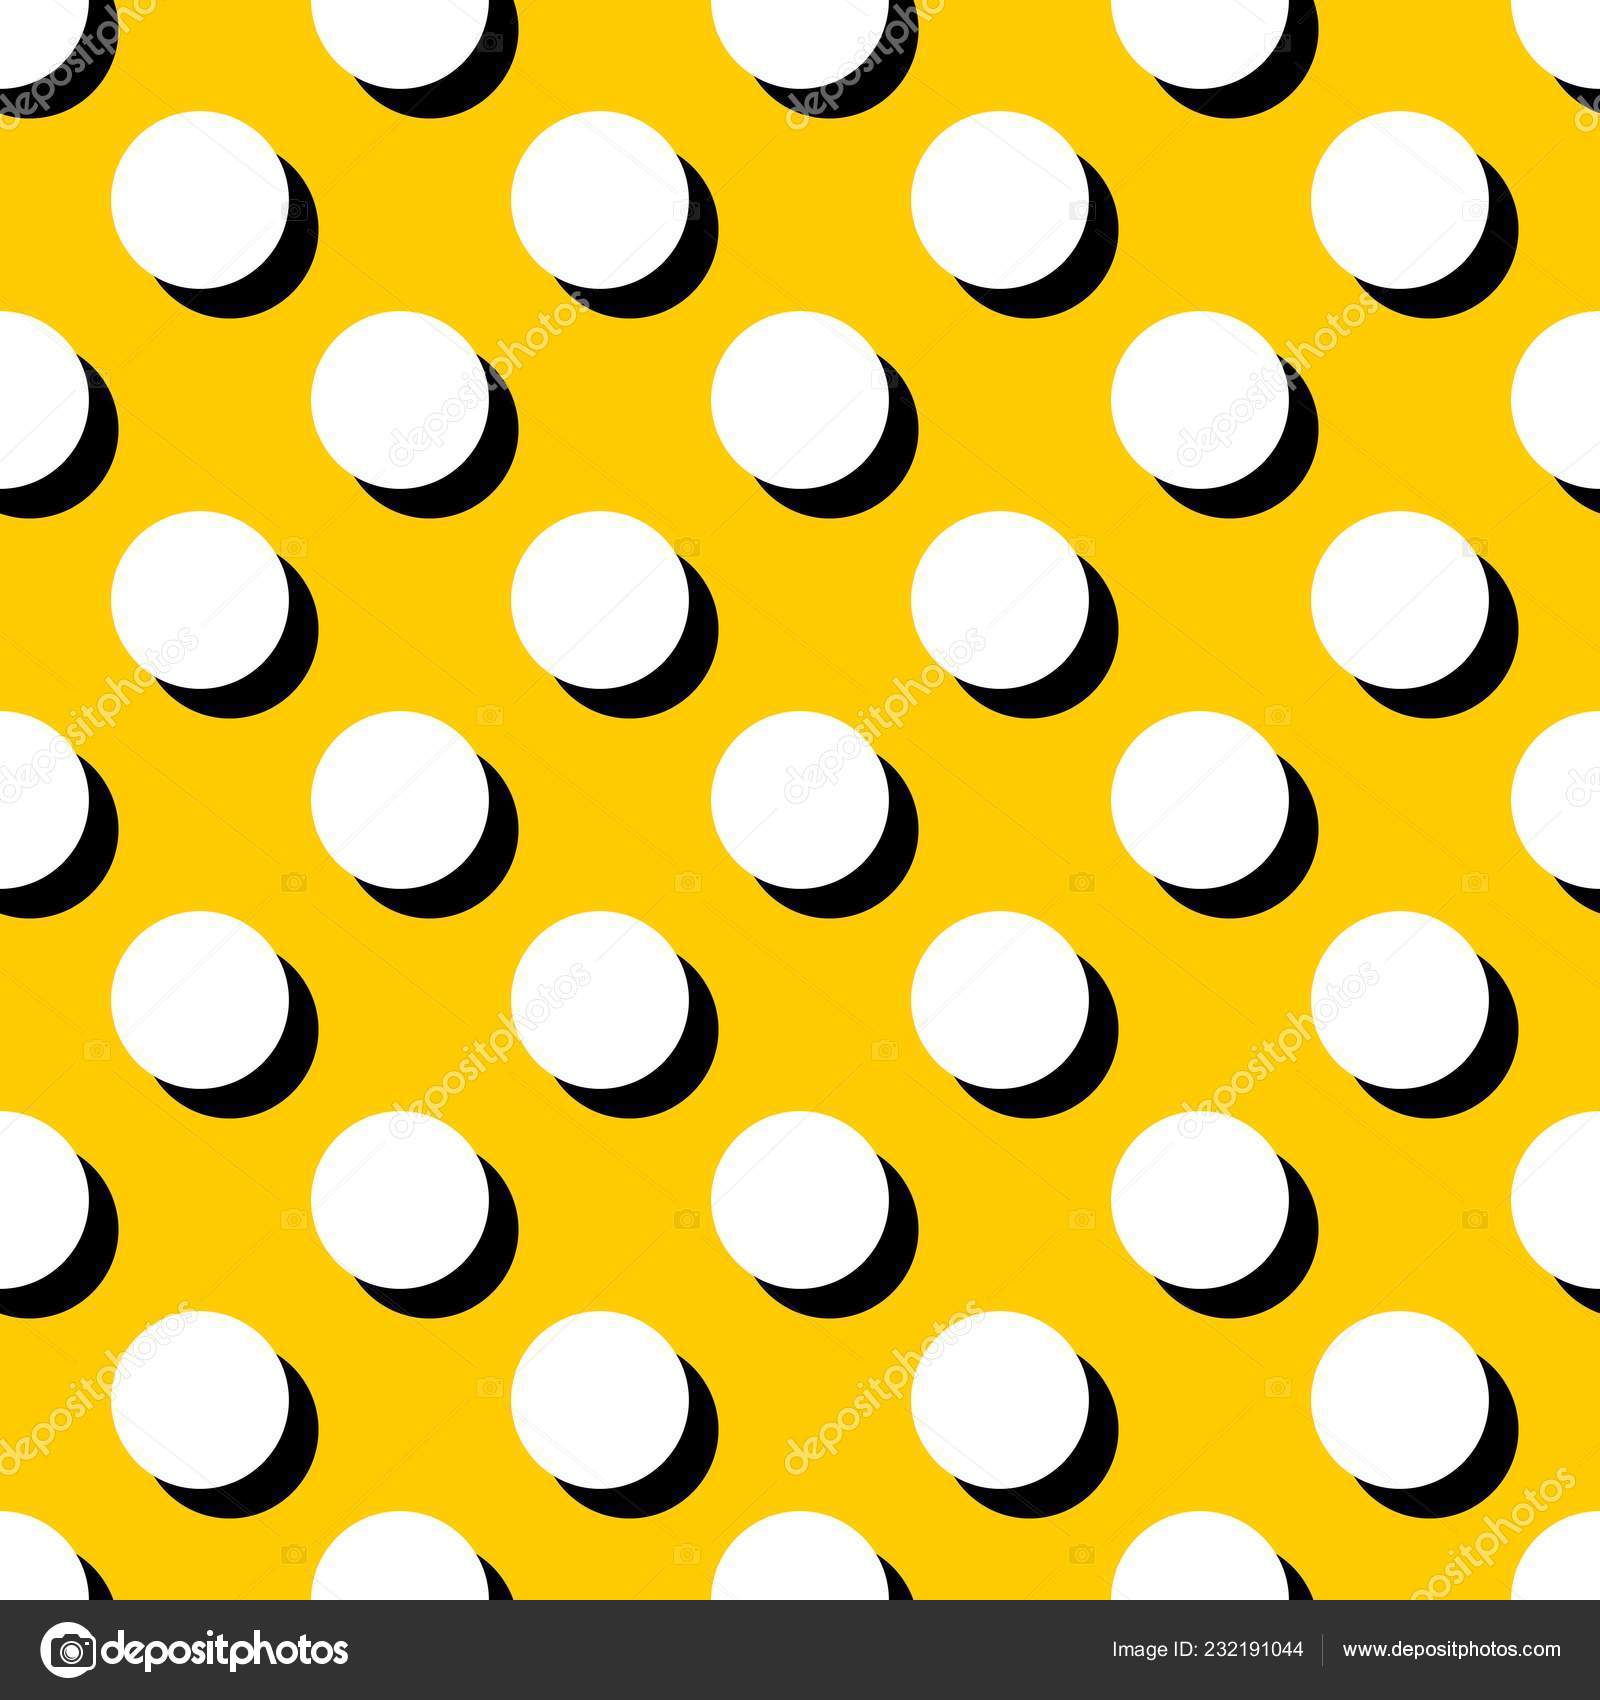 Yellow And Black And White Backgrounds Polka Dots - HD Wallpaper 